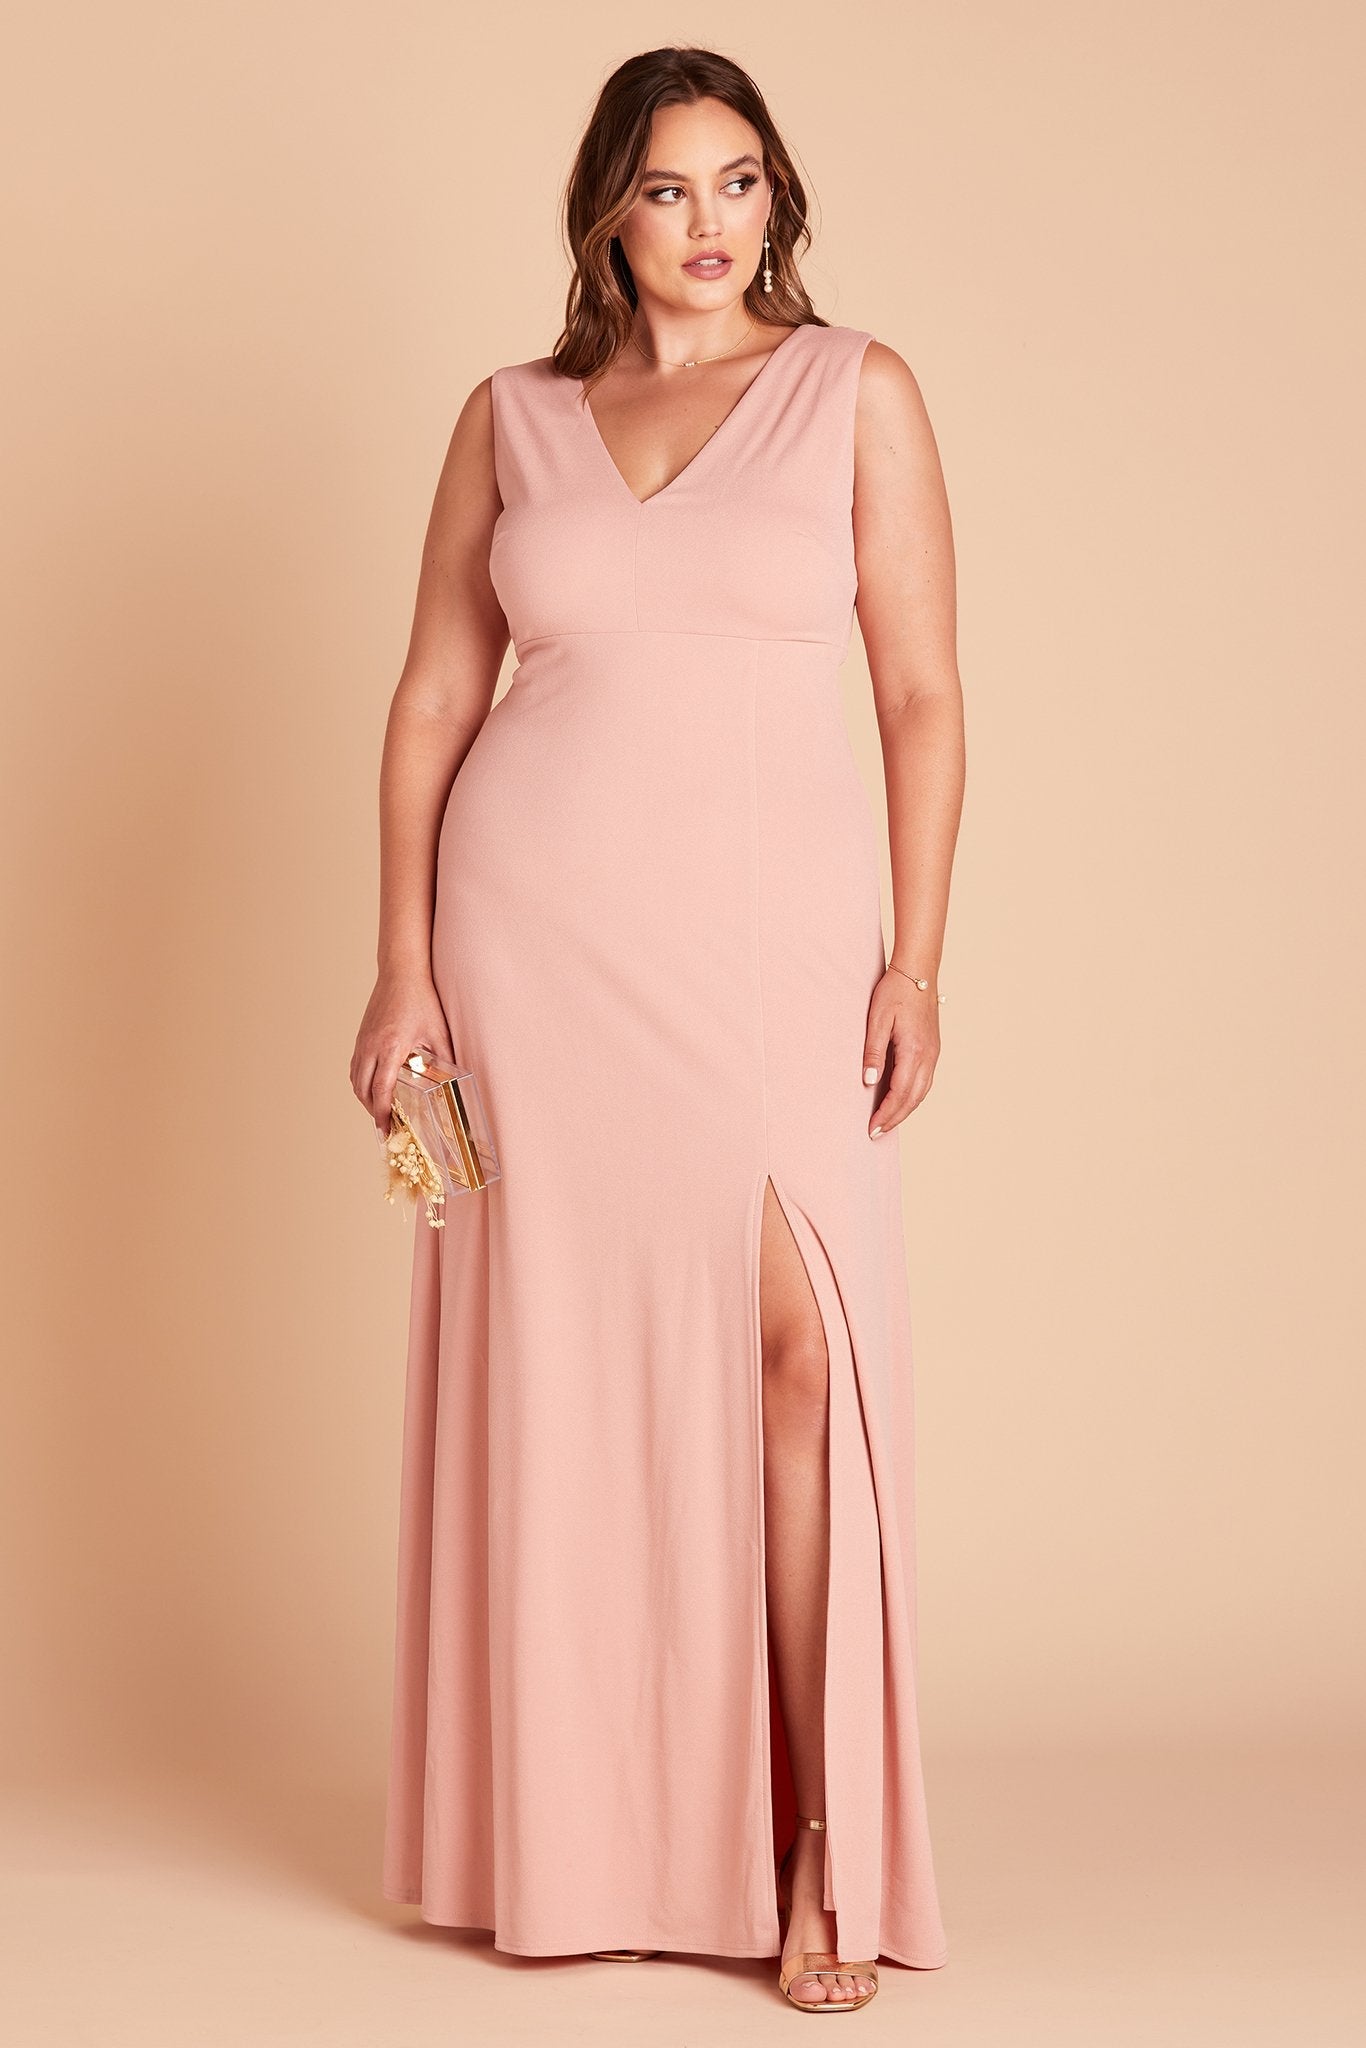 Shamin plus size bridesmaid dress with slit in rose quartz crepe by Birdy Grey, front view